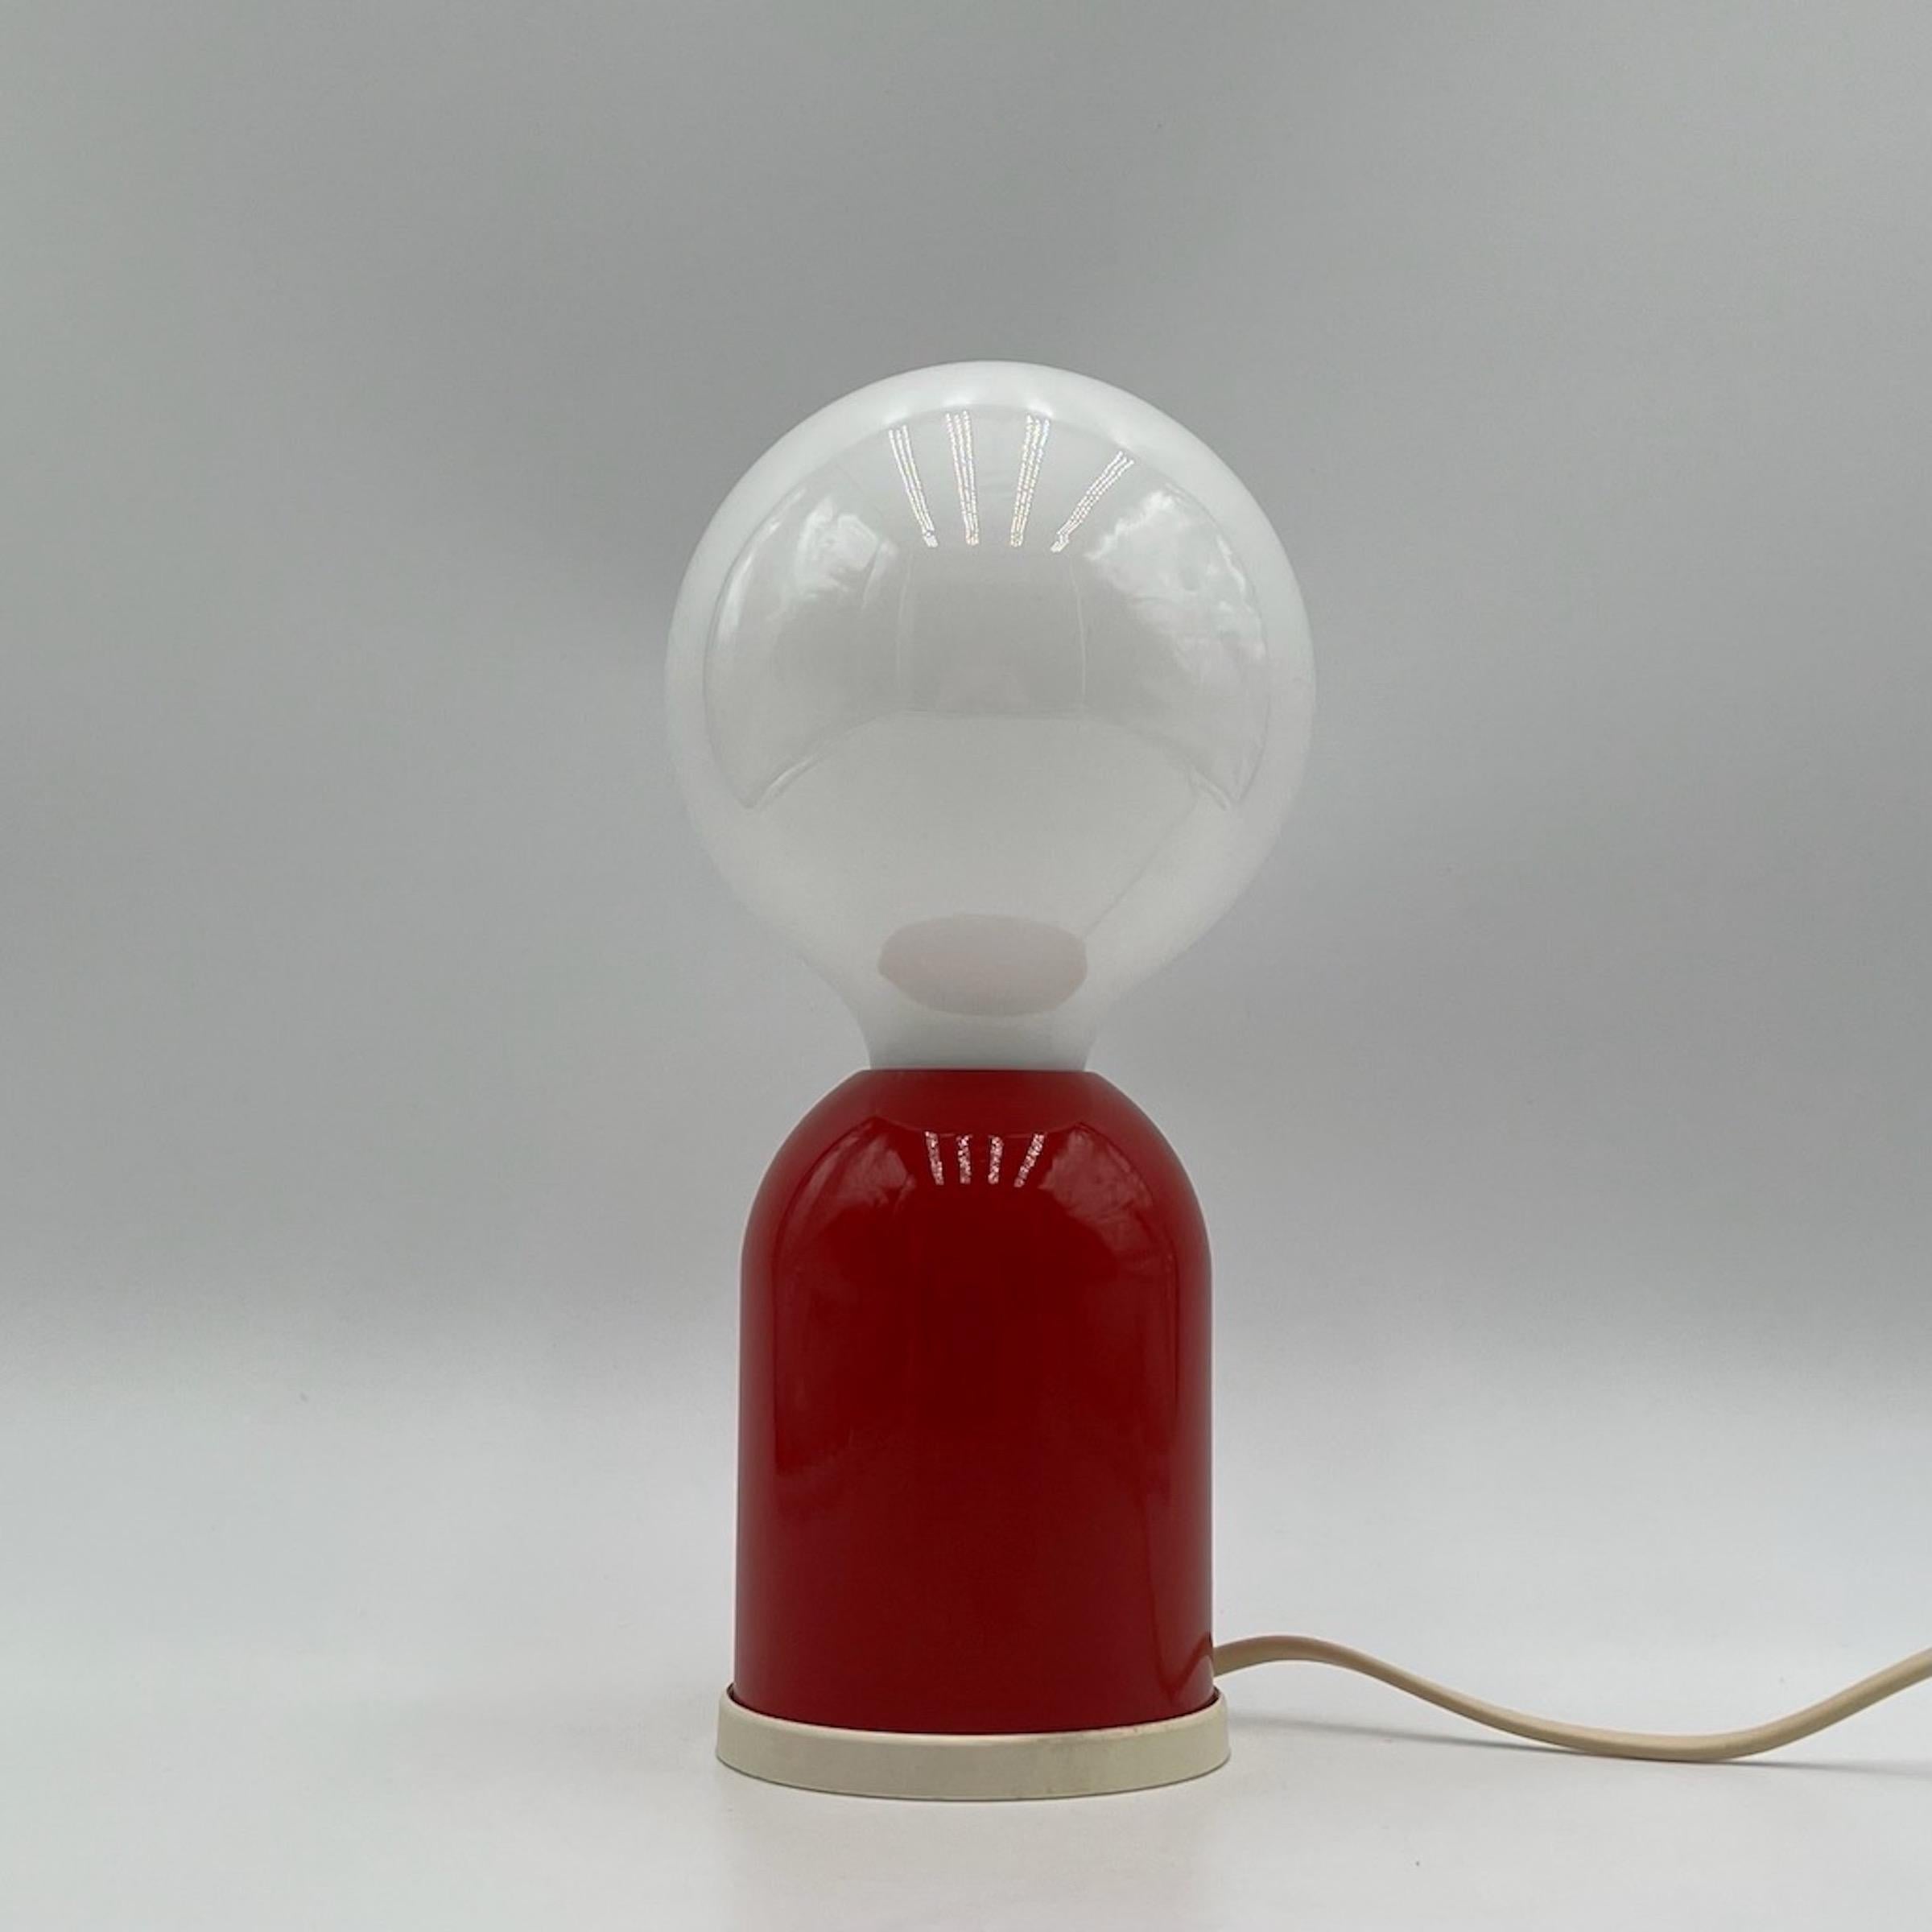 Late 20th Century Minimalistic Table Lamp in Lacquered Red Metal by Targetti Sankey, 1980s For Sale